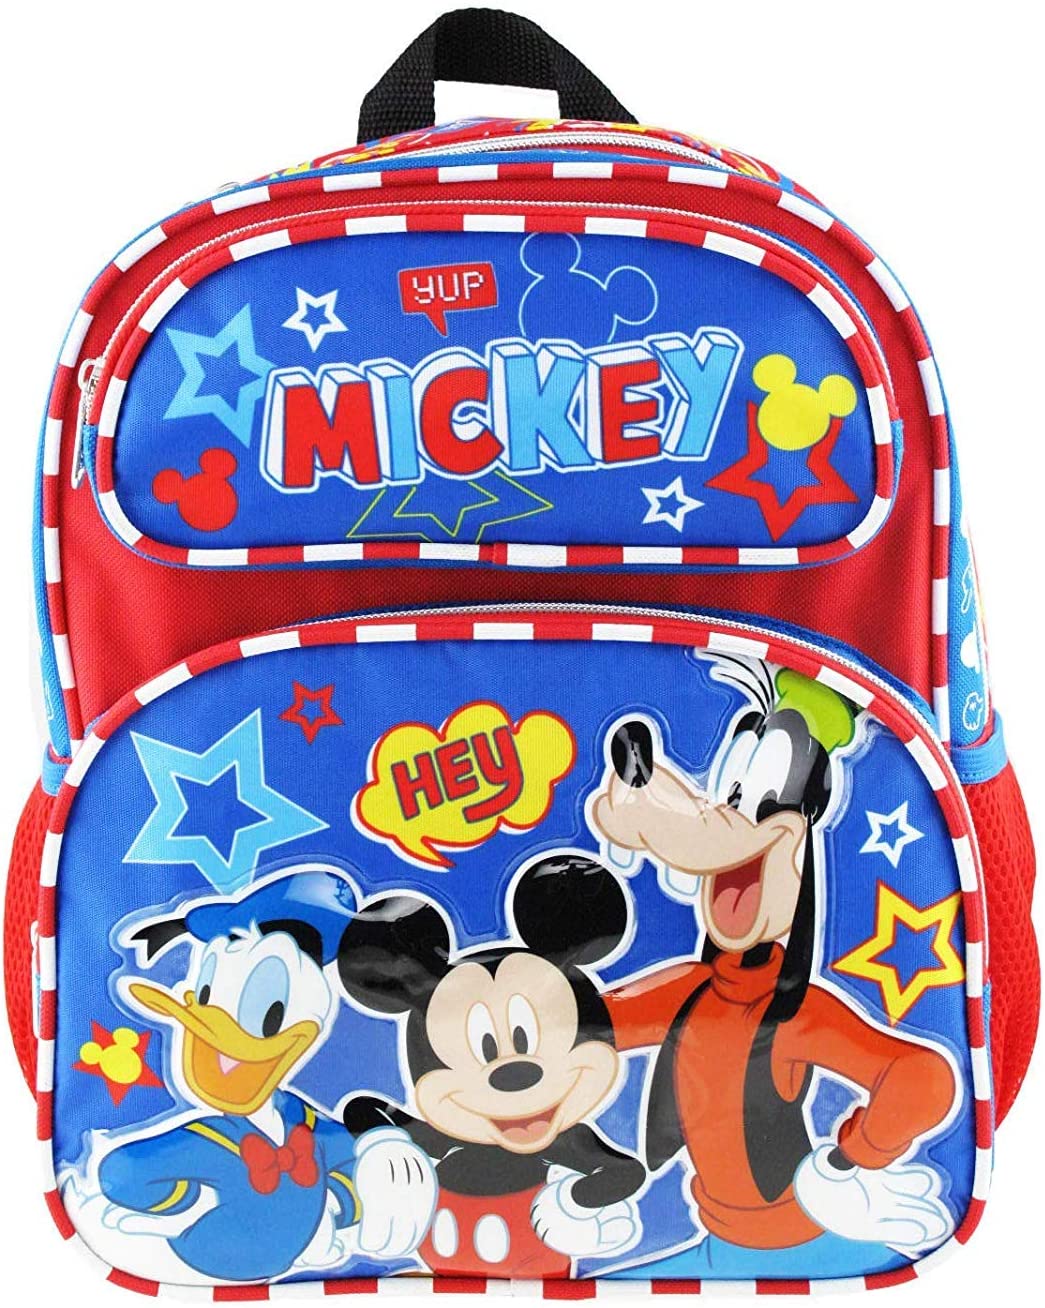 Mickey Mouse 12" Toddler Size Backpack - Hey Friends A17269